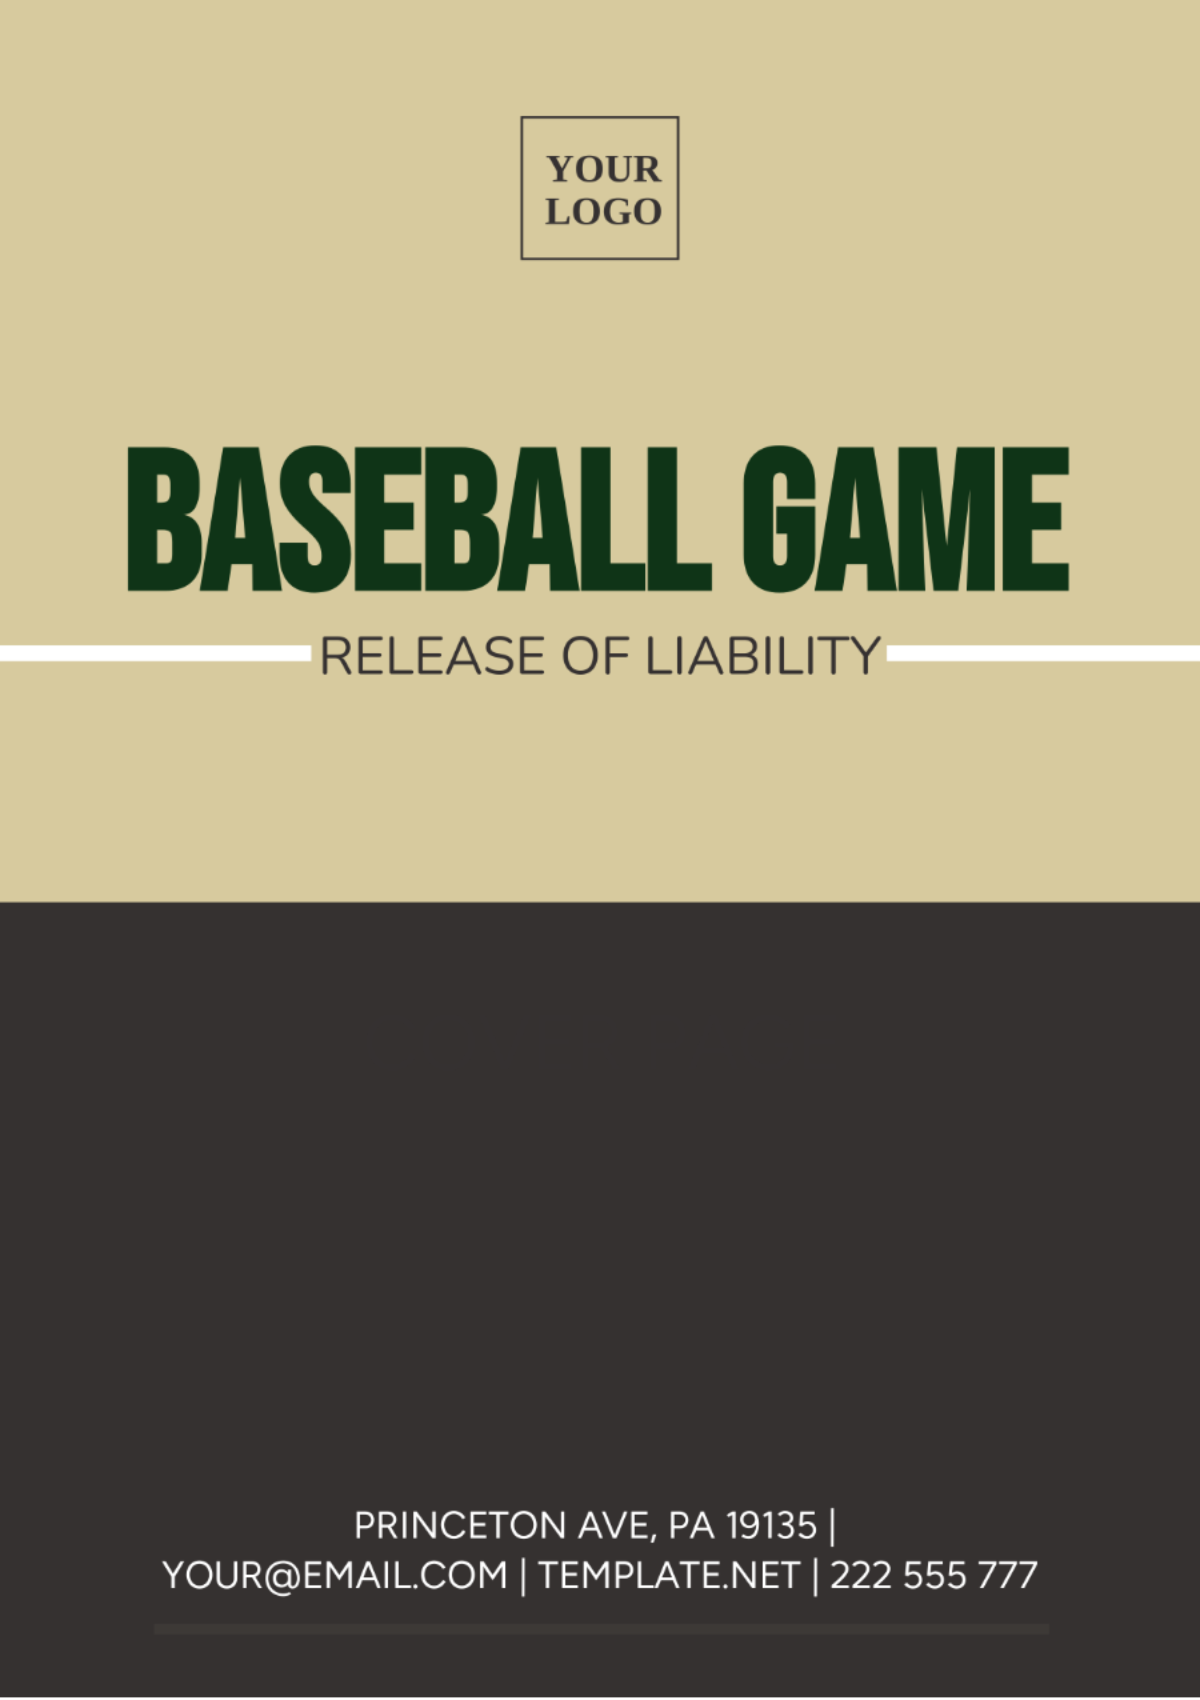 Baseball Game Release of Liability Template